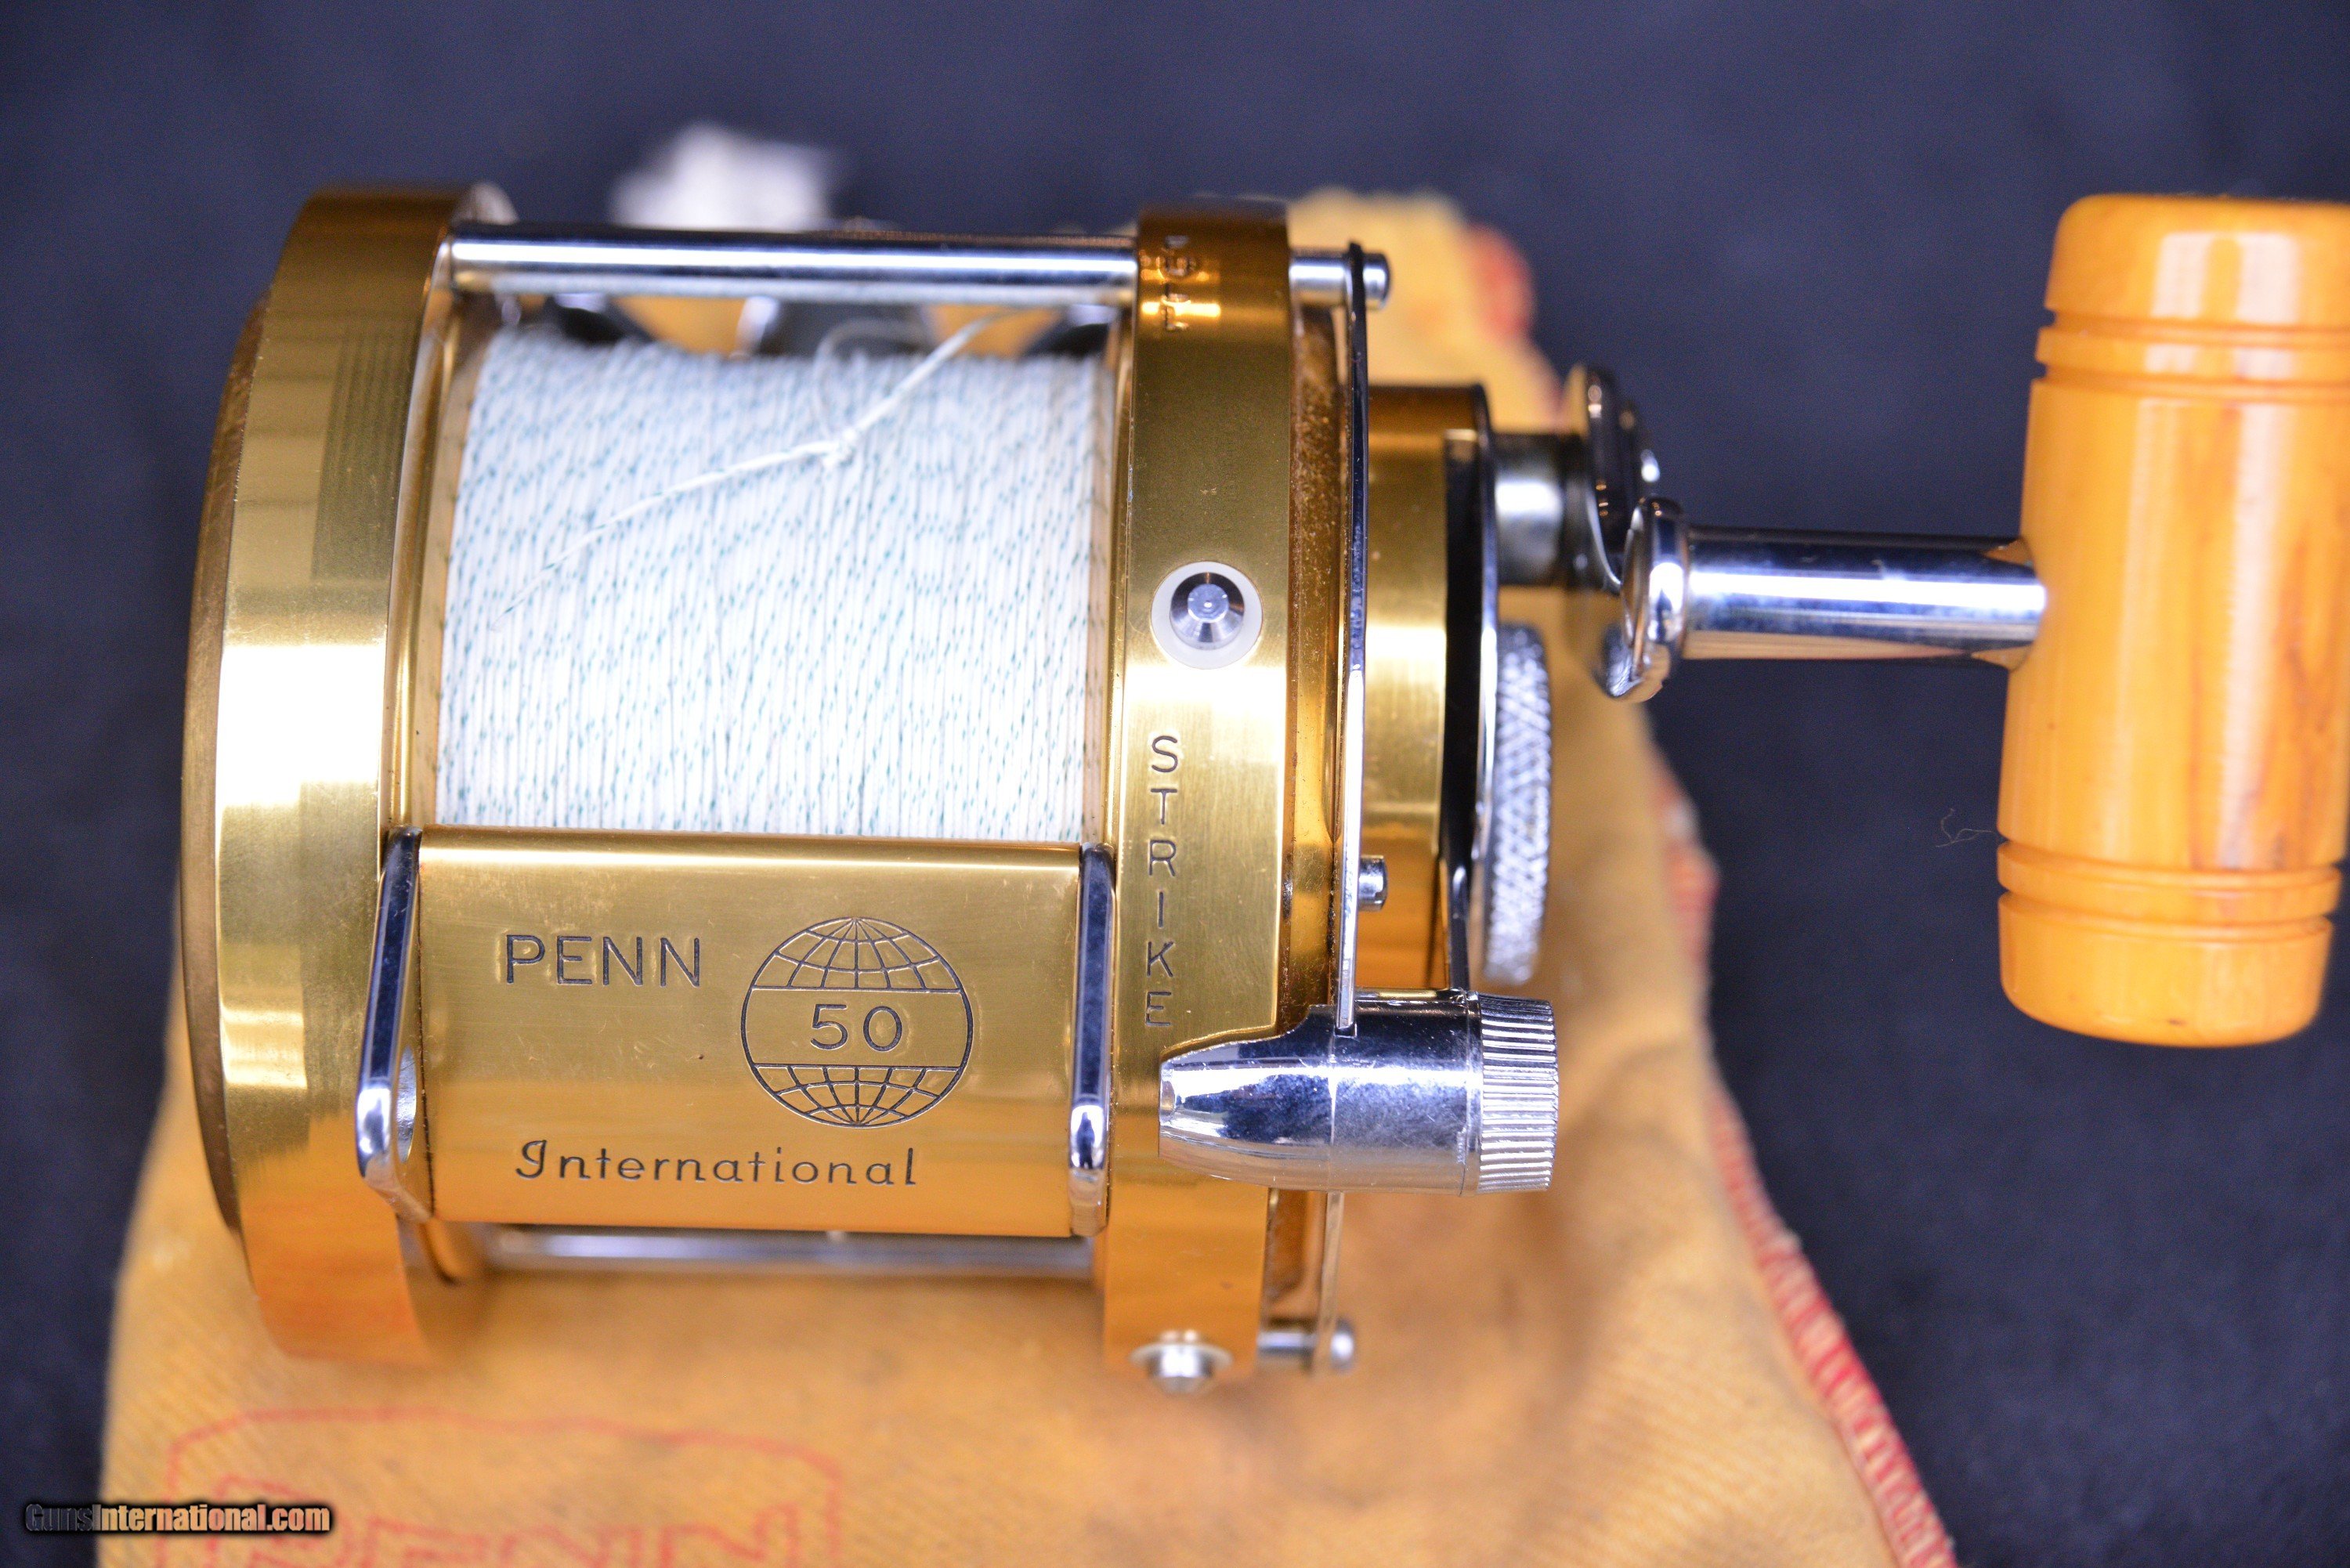 Penn International straight 50, old style minty for sale